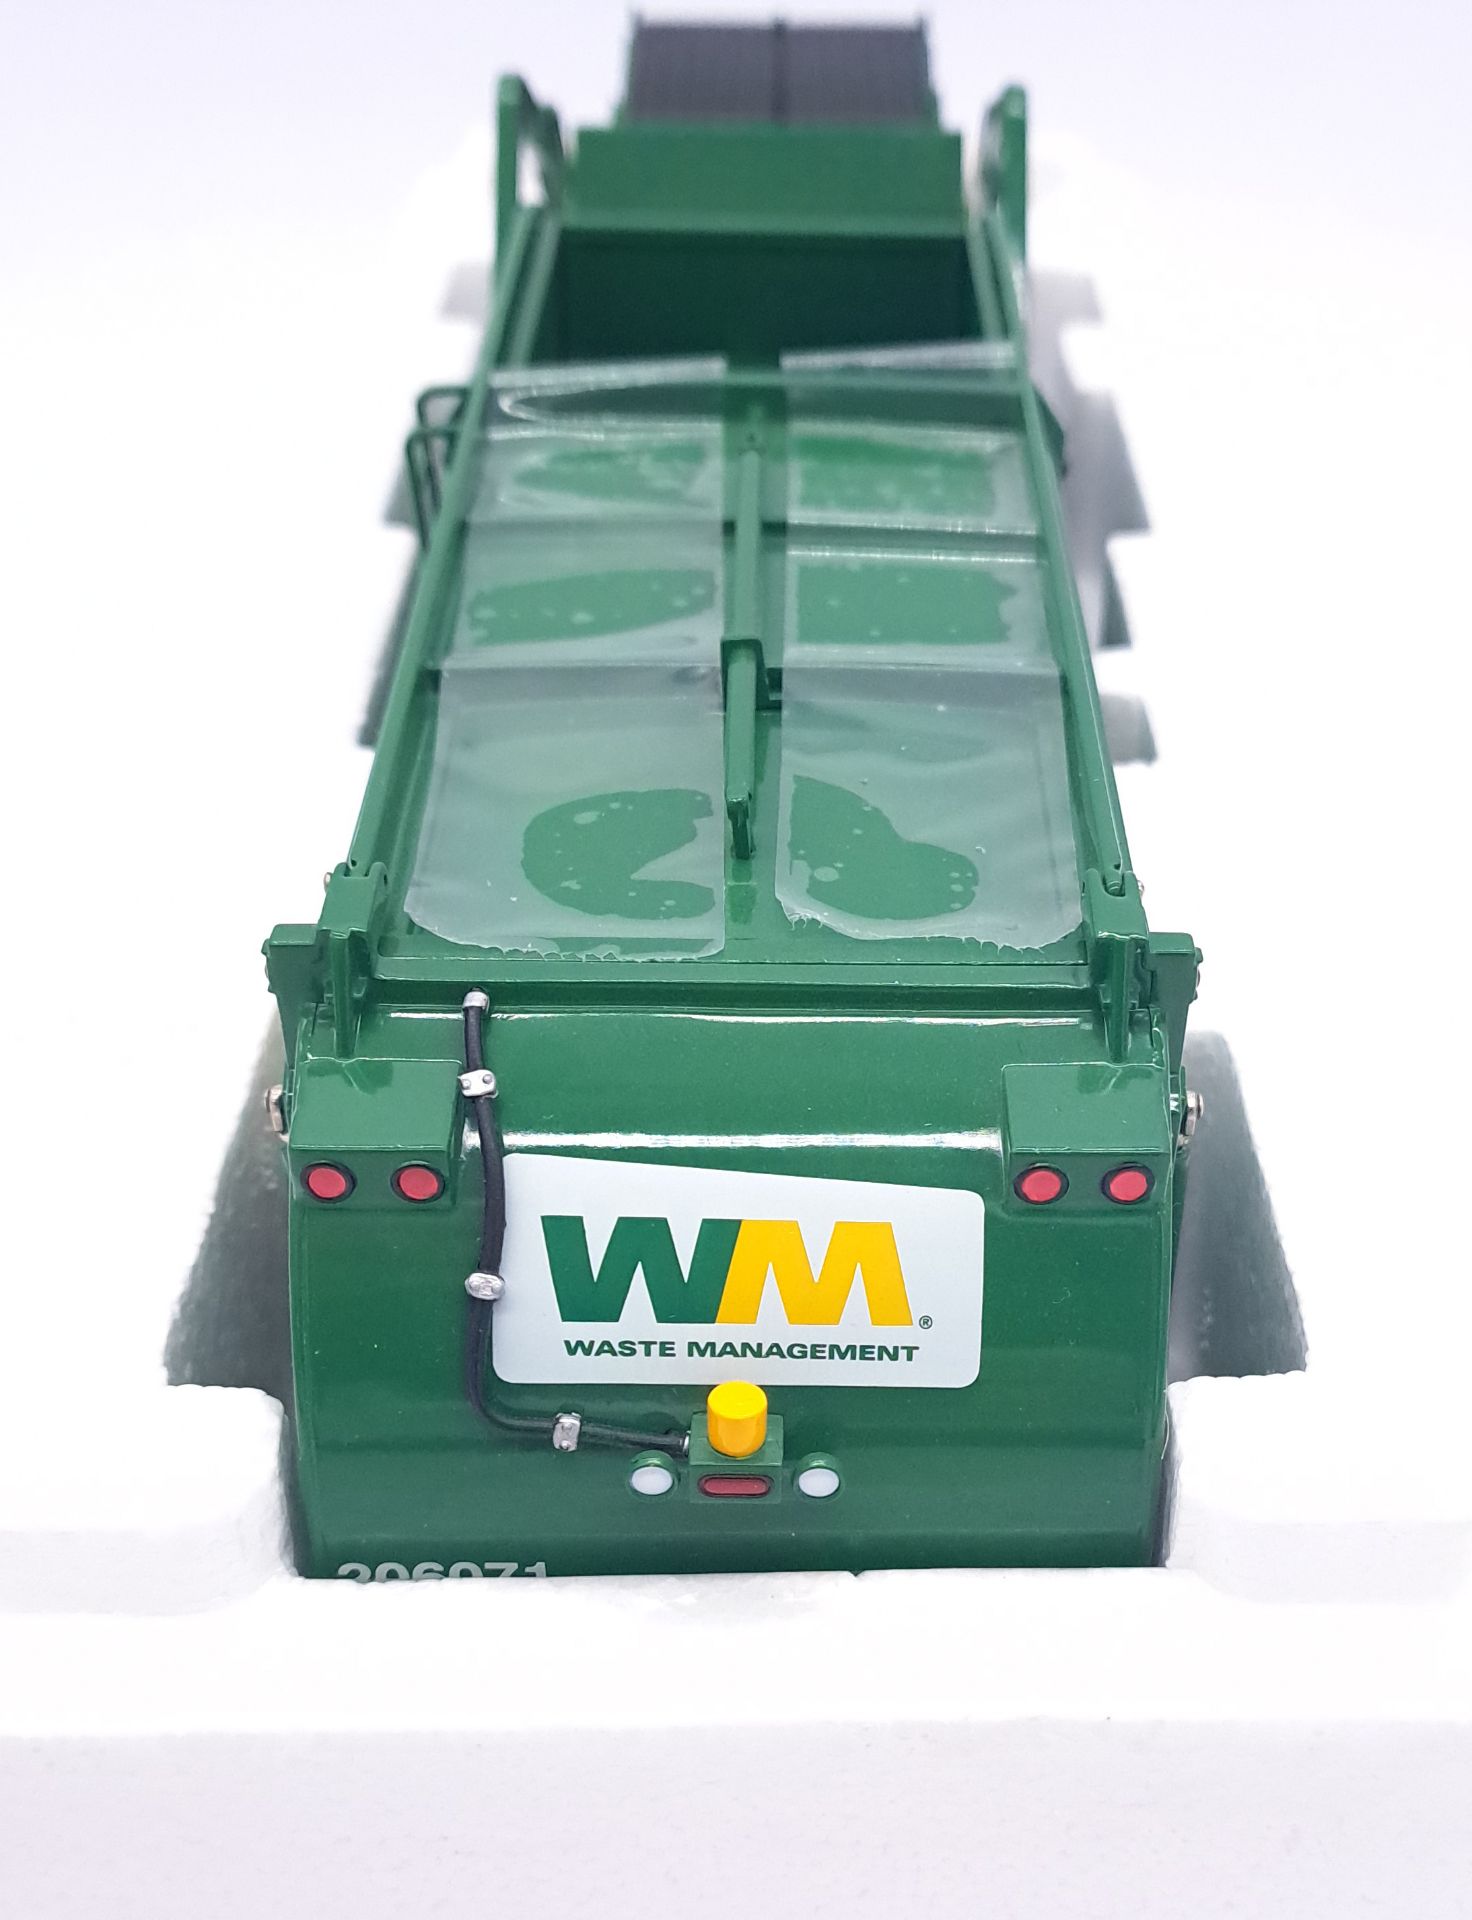 First Gear, a boxed 1:34 scale Front-End Loader With Trash Bin "WM Waste Management" - Image 5 of 5